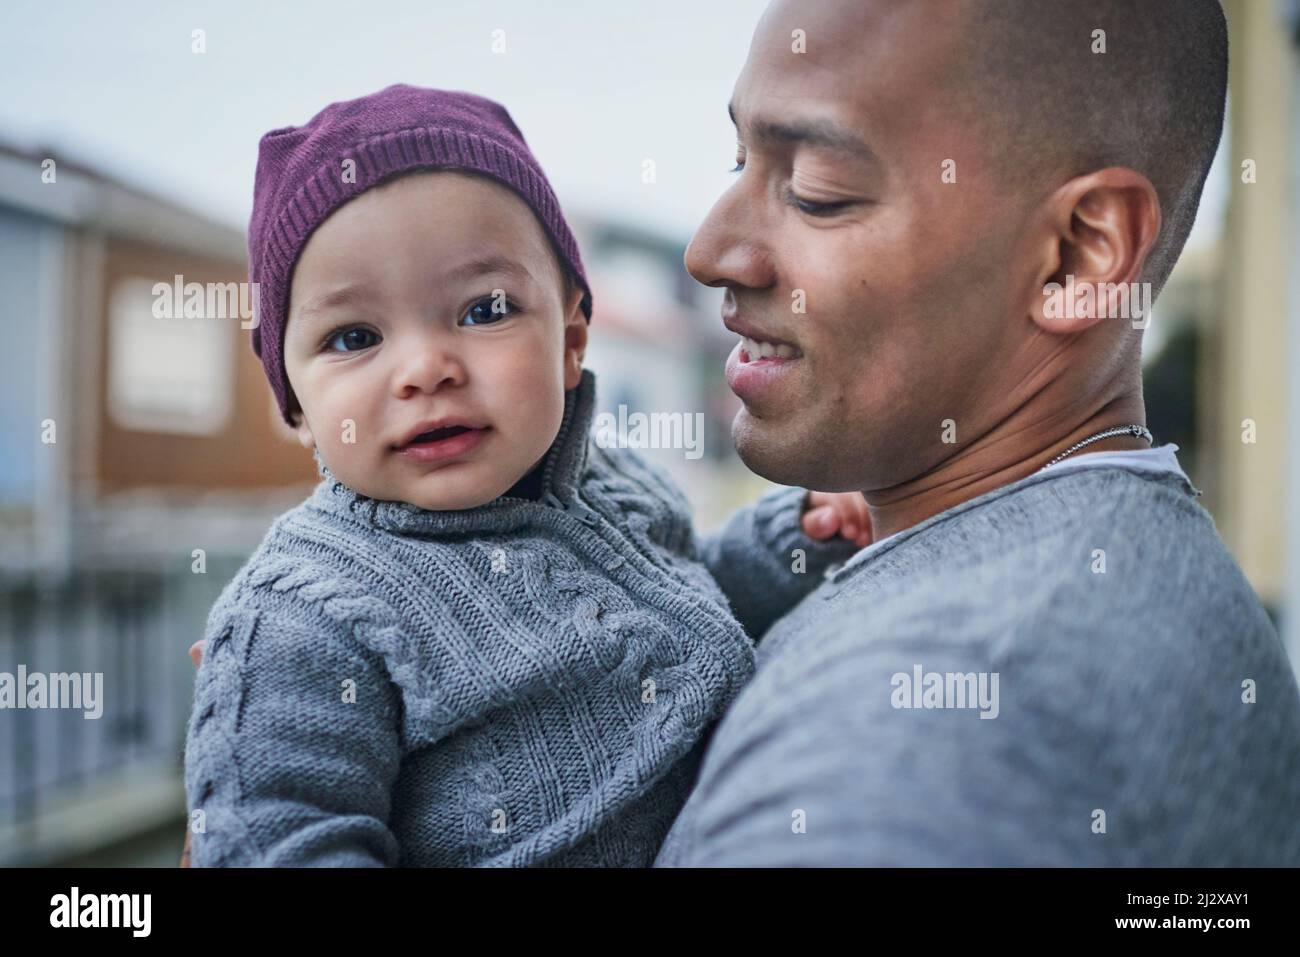 That cute smile gets me every time. Shot of a father bonding with his little son outdoors. Stock Photo